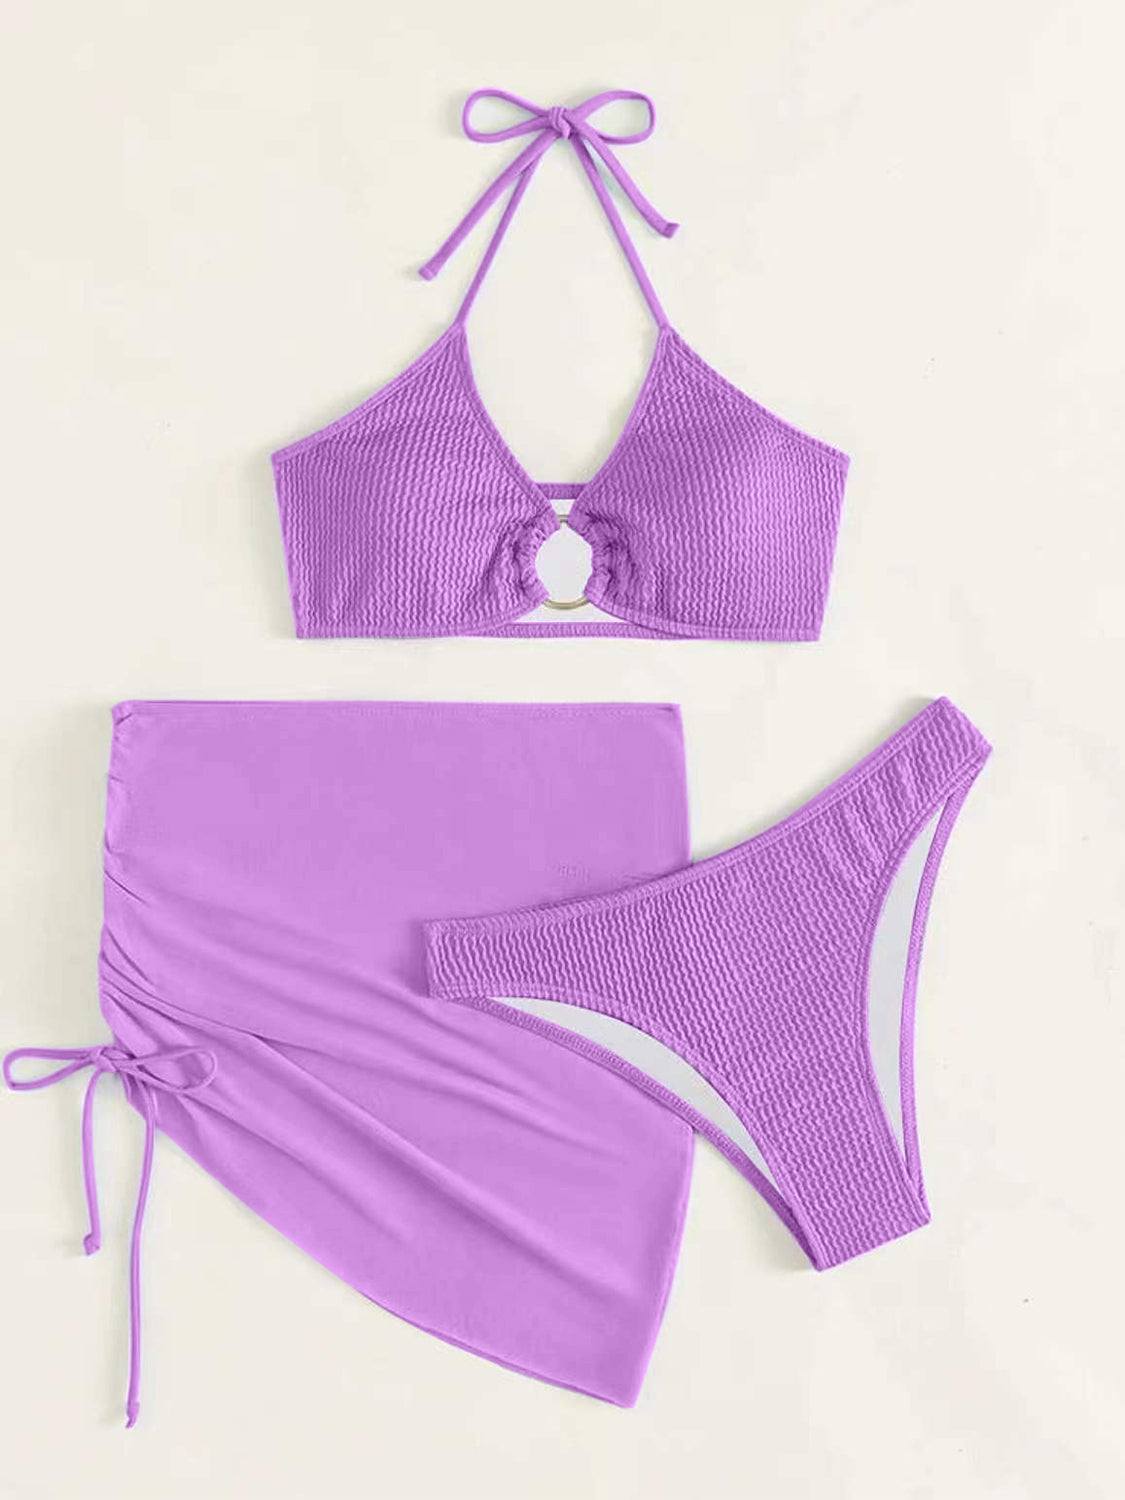 Embrace summer with our chic Tied Halter Neck Swim Set. Adjustable, stylish, and perfect for any beach day or poolside escape.